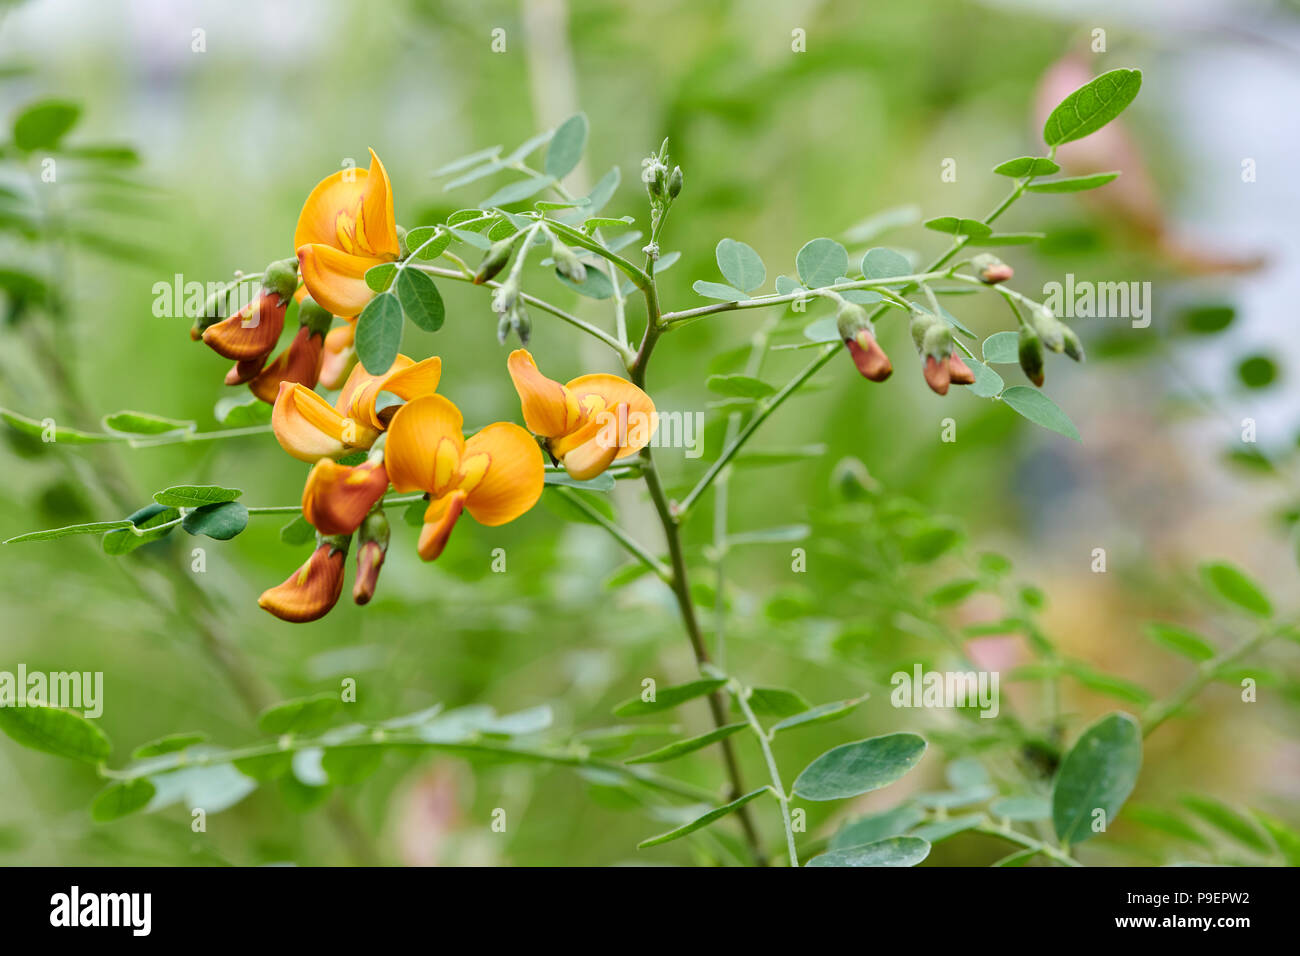 Colutea arborescens is a species of leguminous shrub known by the common name bladder-senna. It is native to Europe and North Africa, but it is known  Stock Photo